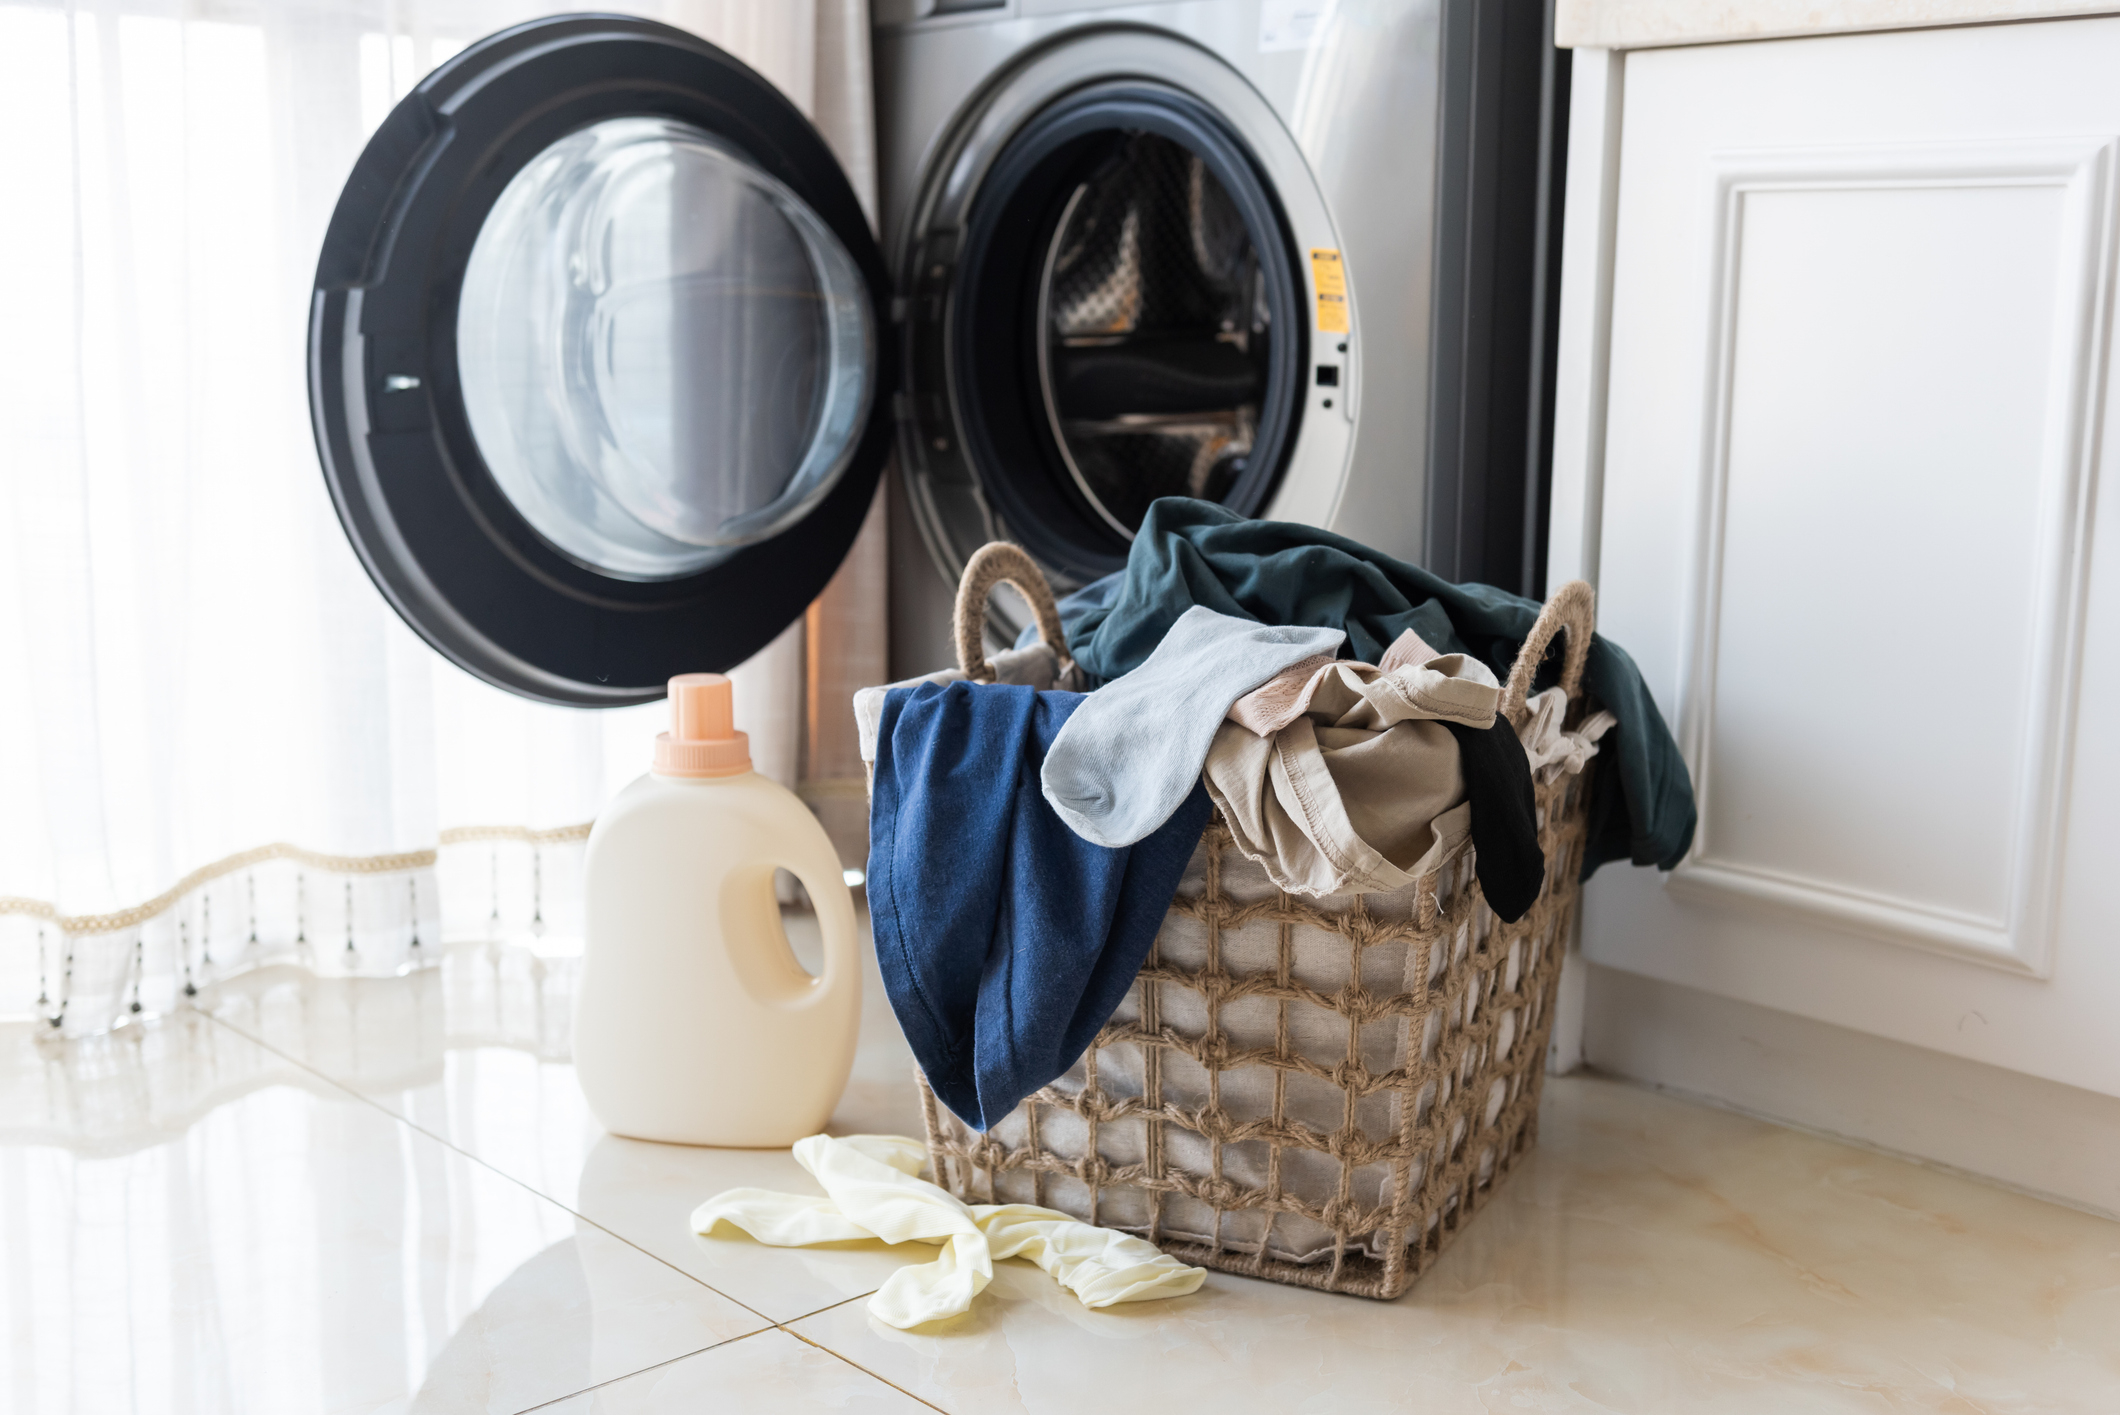 Laundry basket filled with clothes in front of a washing machine, detergent nearby